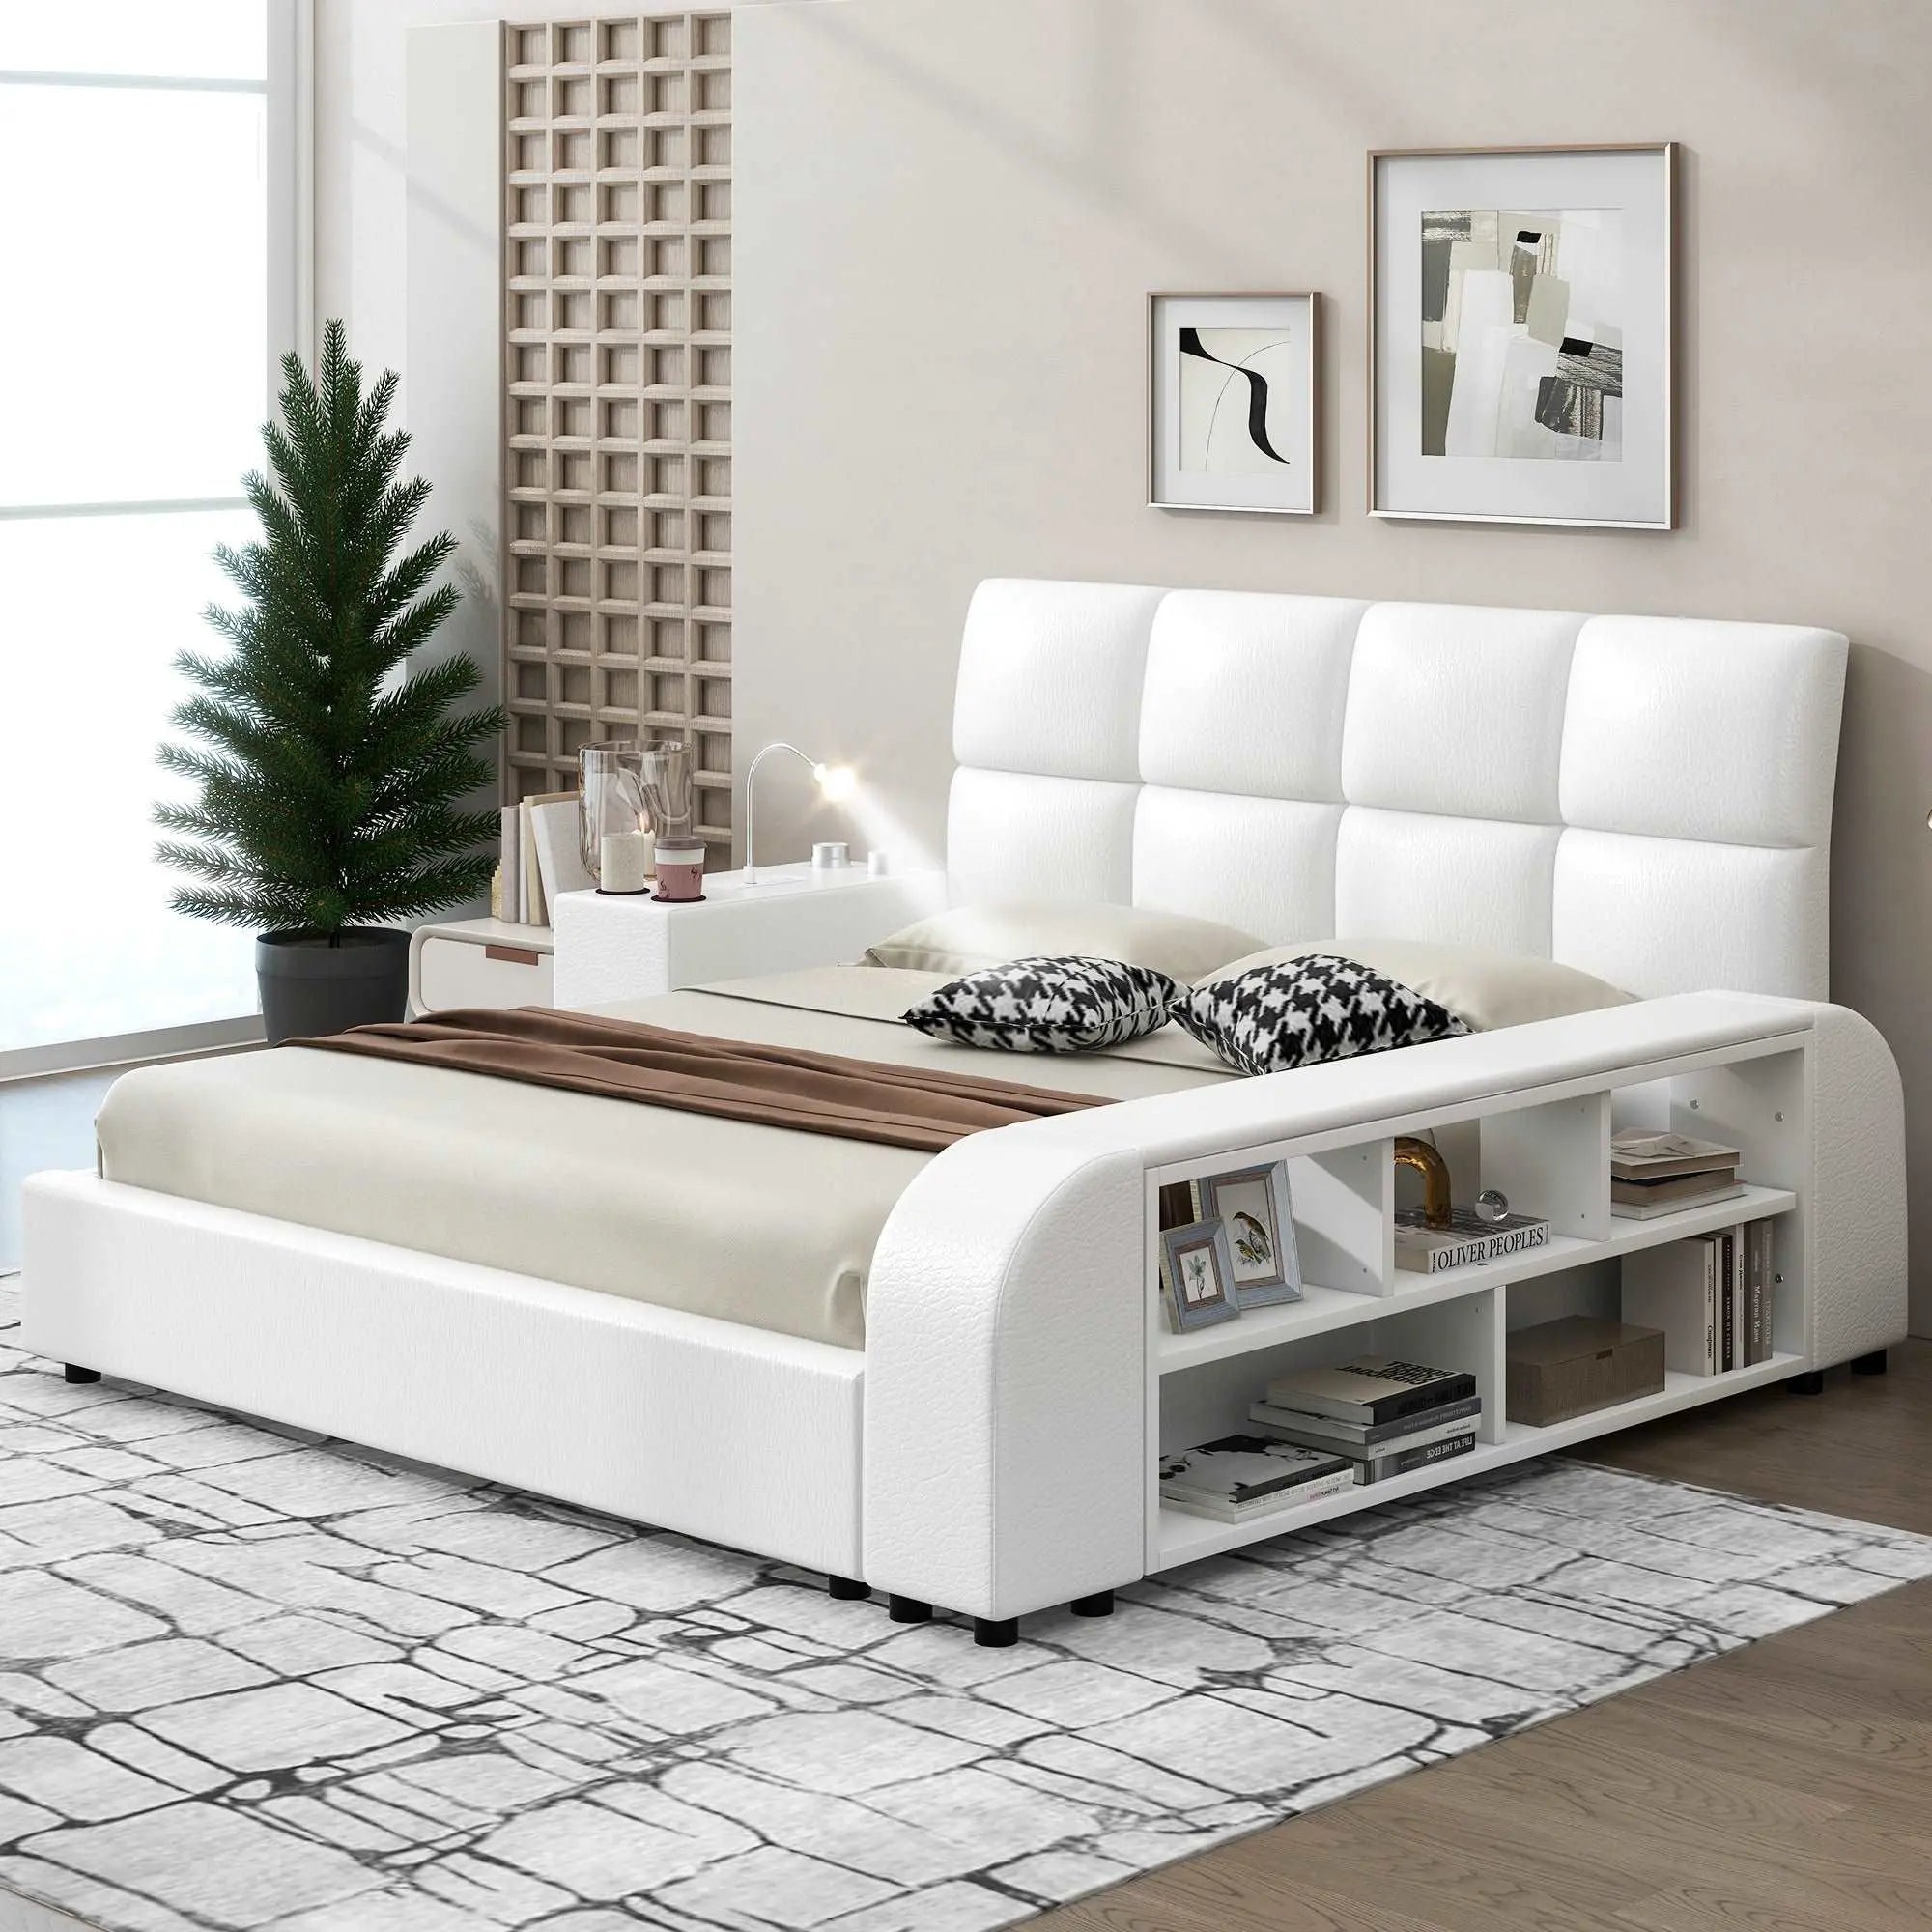 Bellemave Queen Size Upholstered Platform Bed with Multimedia Nightstand and Storage Shelves